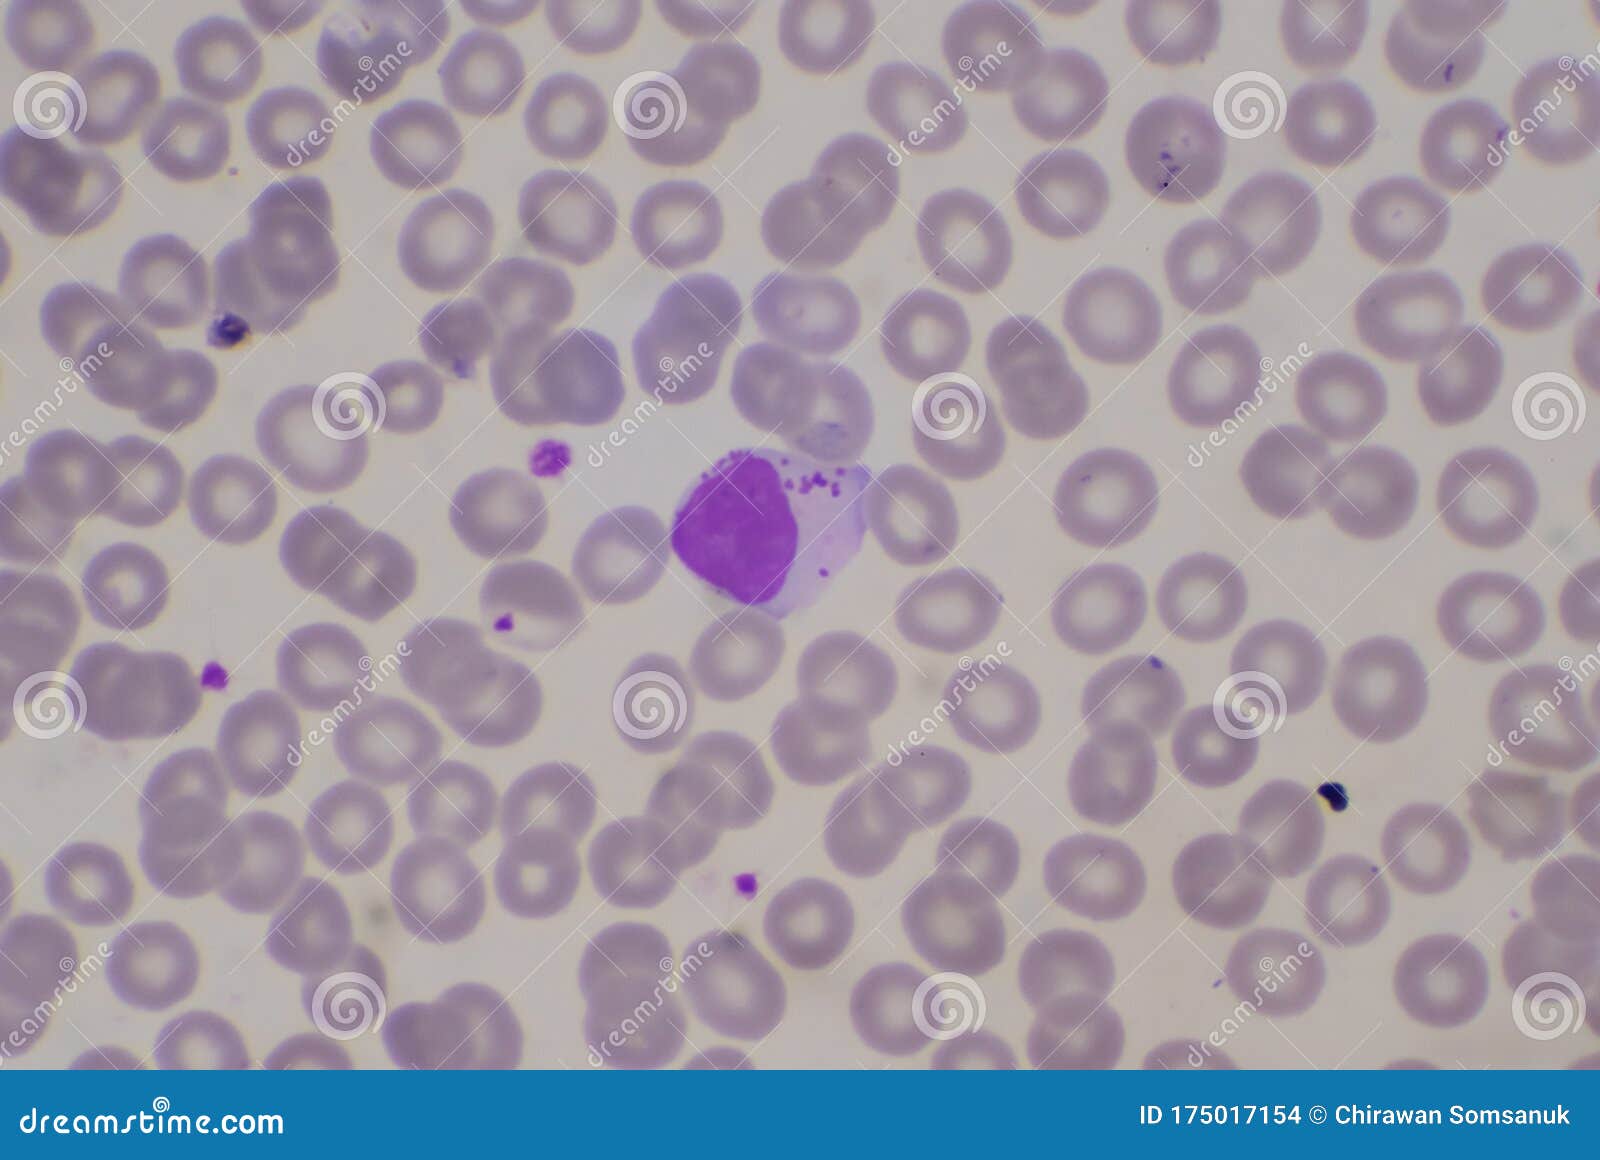 White Blood Cell Lymphocyte On Red Blood Cells Background Stock